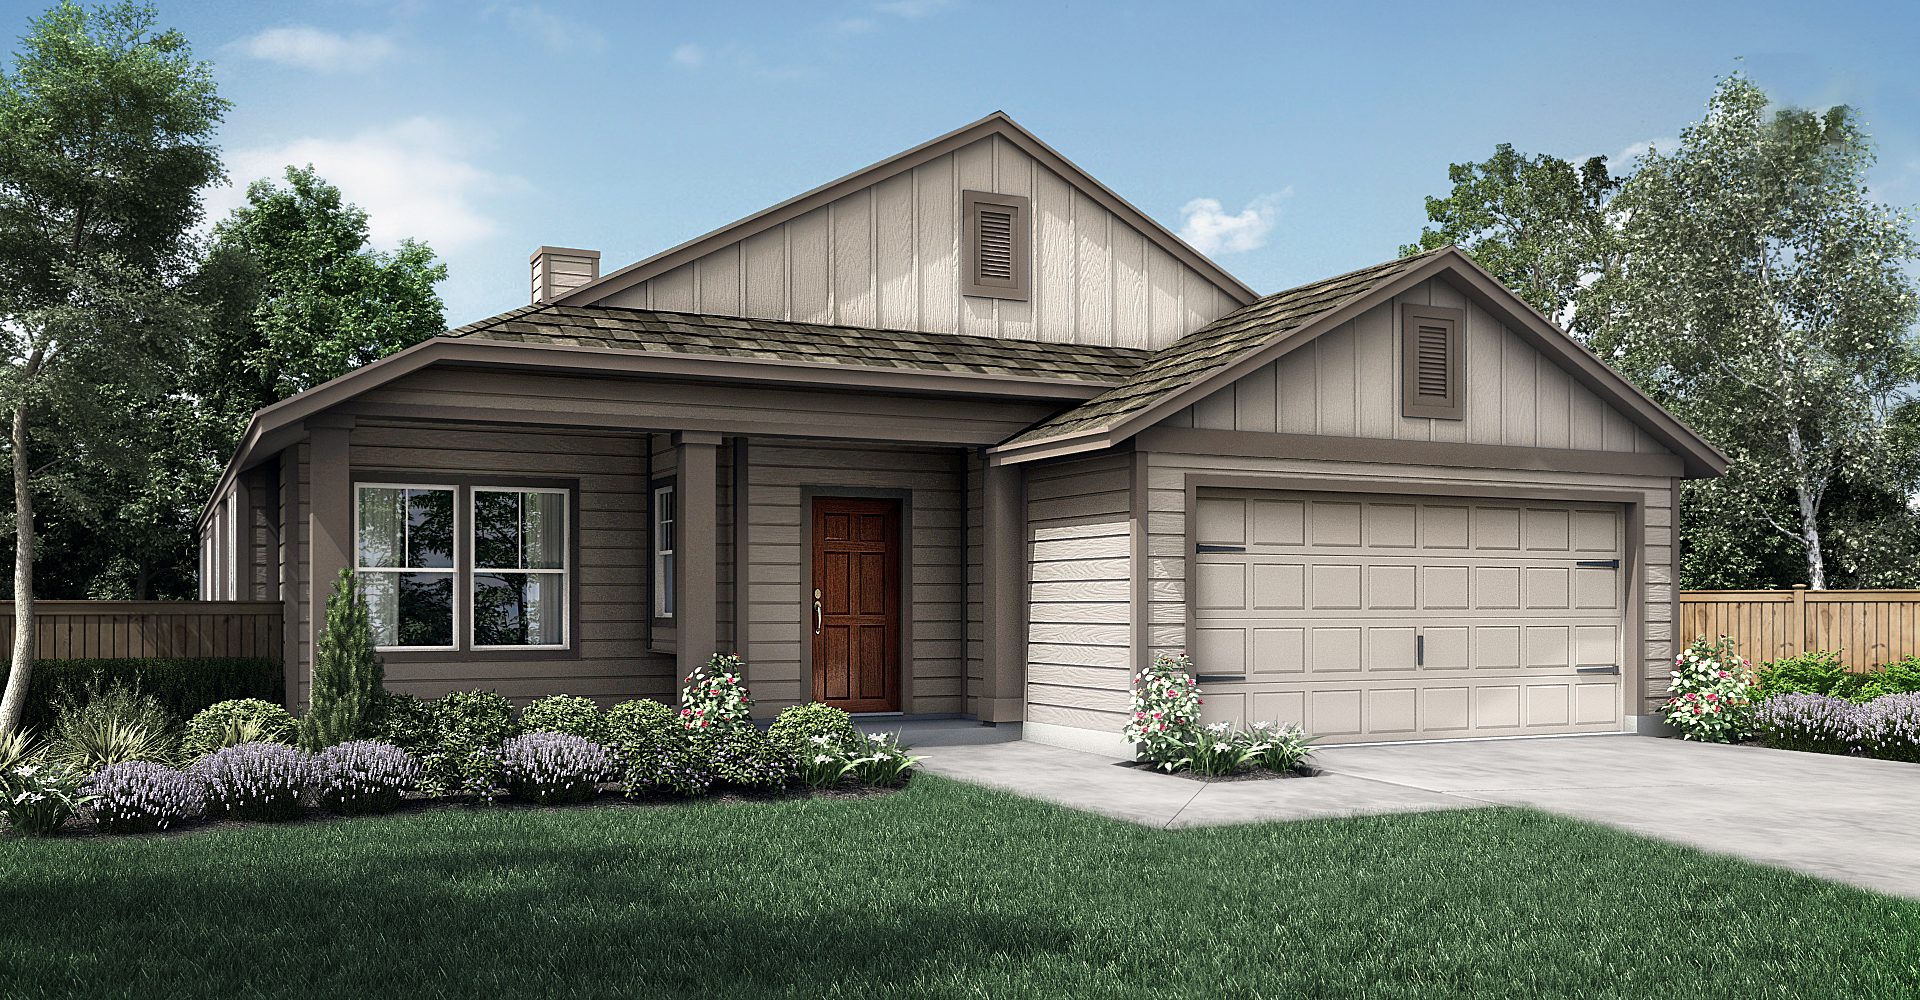 The Coral Cay Craftsman Series Elevation D Orchard Ridge New Homes in Liberty Hill